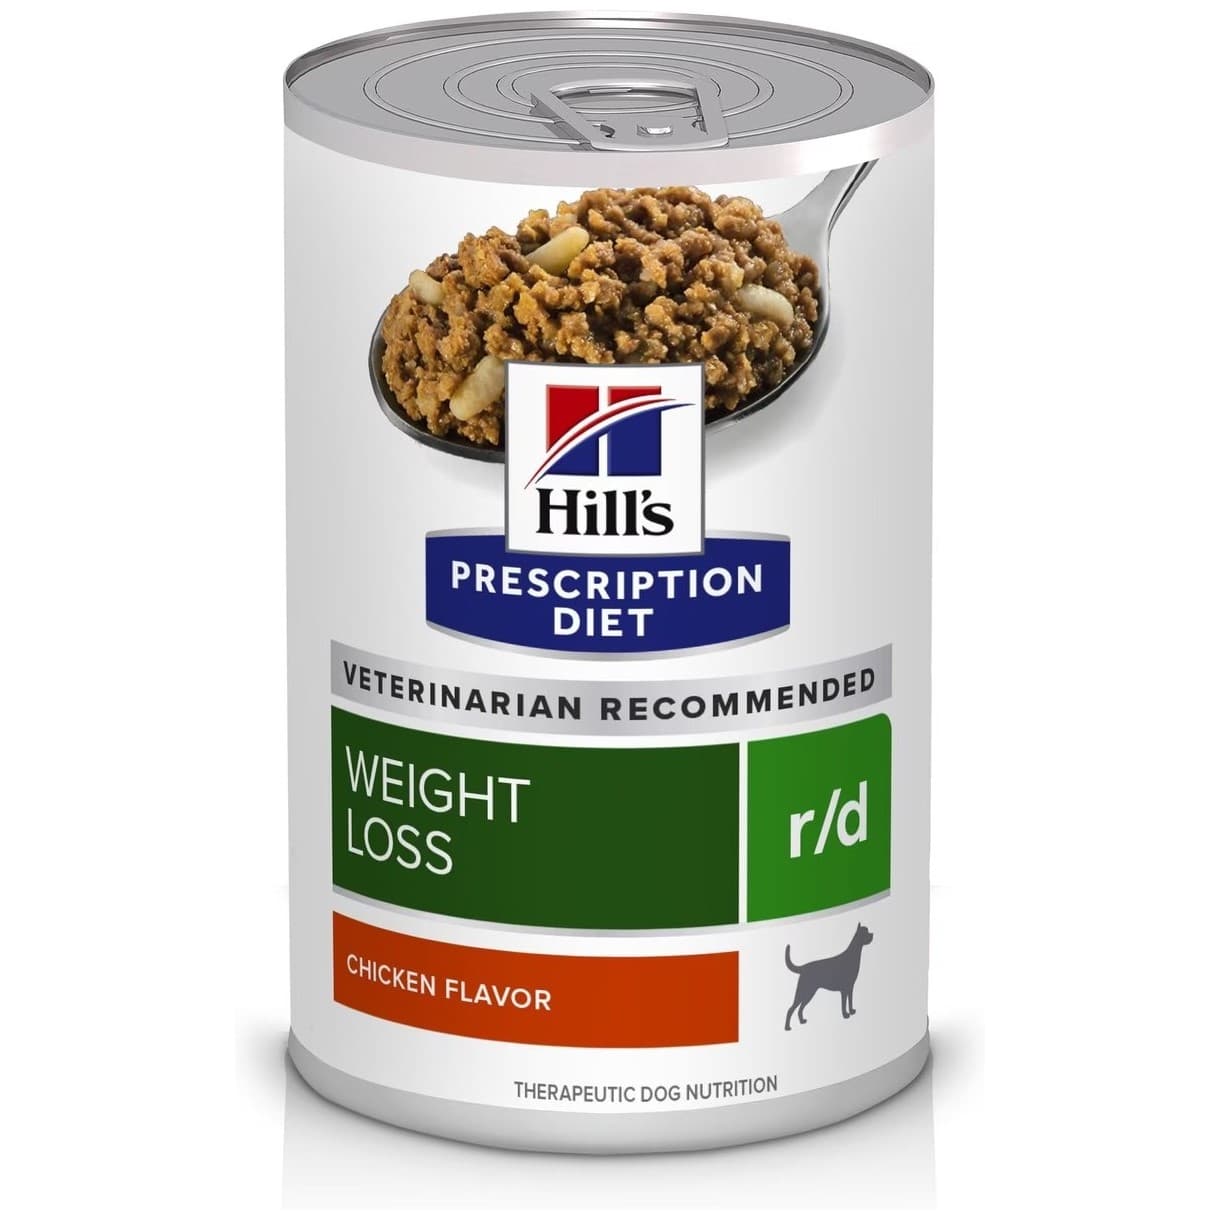 Hill's Prescription Diet r/d Weight Reduction Original Canned Dog Food